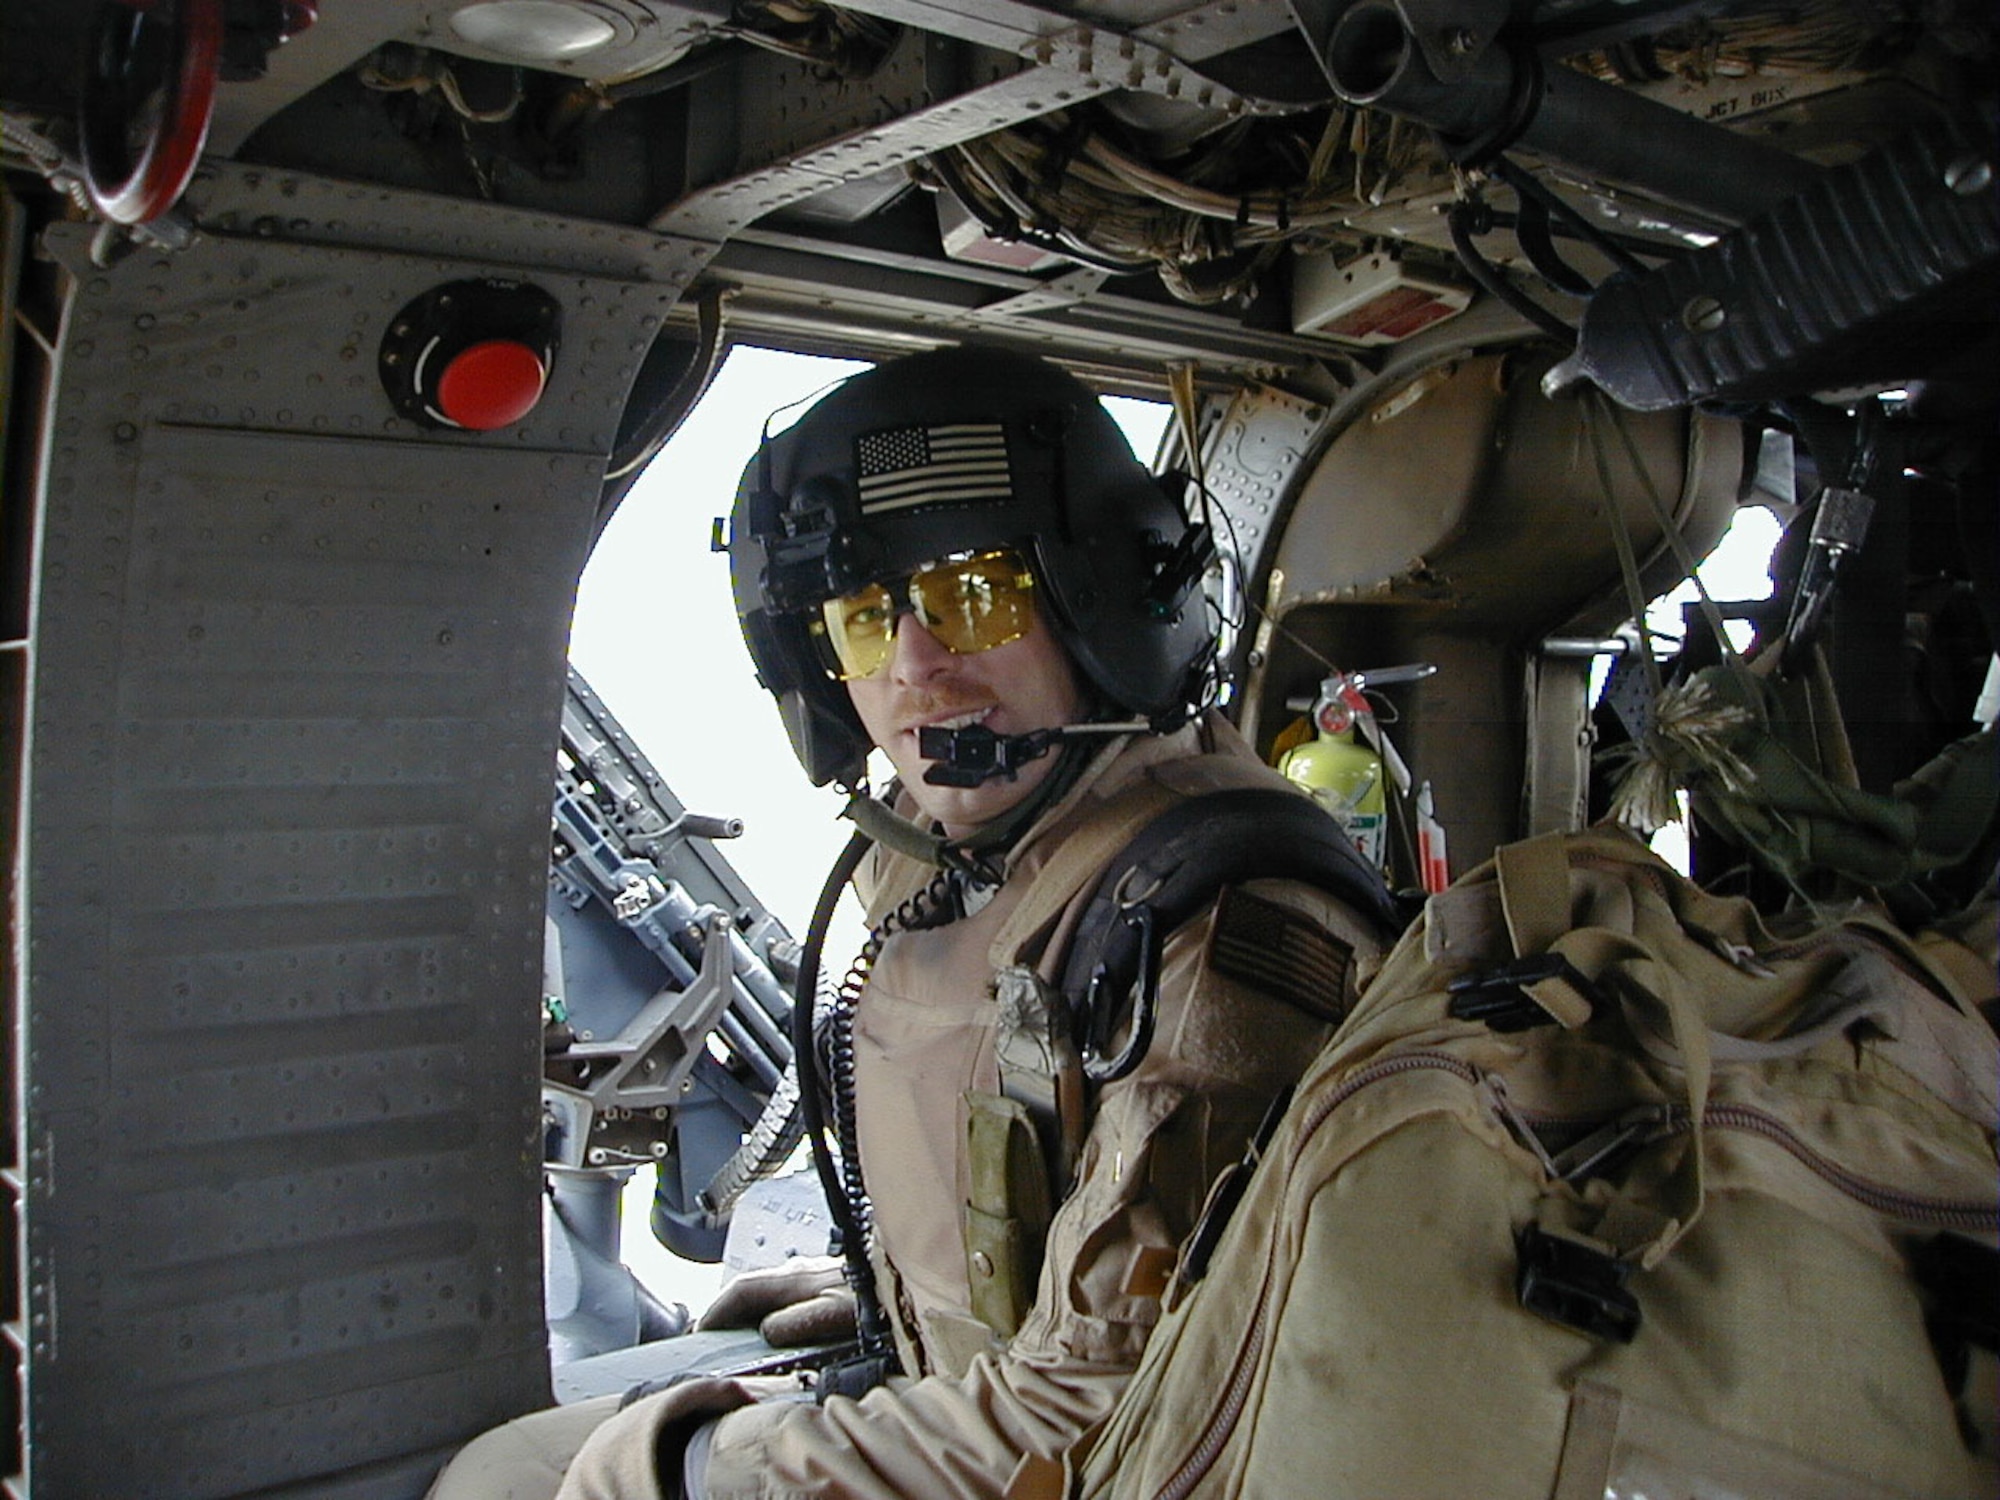 Master Sgt. Robert Dinsmore, an aerial gunner on 66th Rescue Squadron HH-60G Pave Hawk helicopters, served in Afghanistan from February to May 2005 and in Iraq from December 2005 to March 2006. (U.S. Air Force photo)